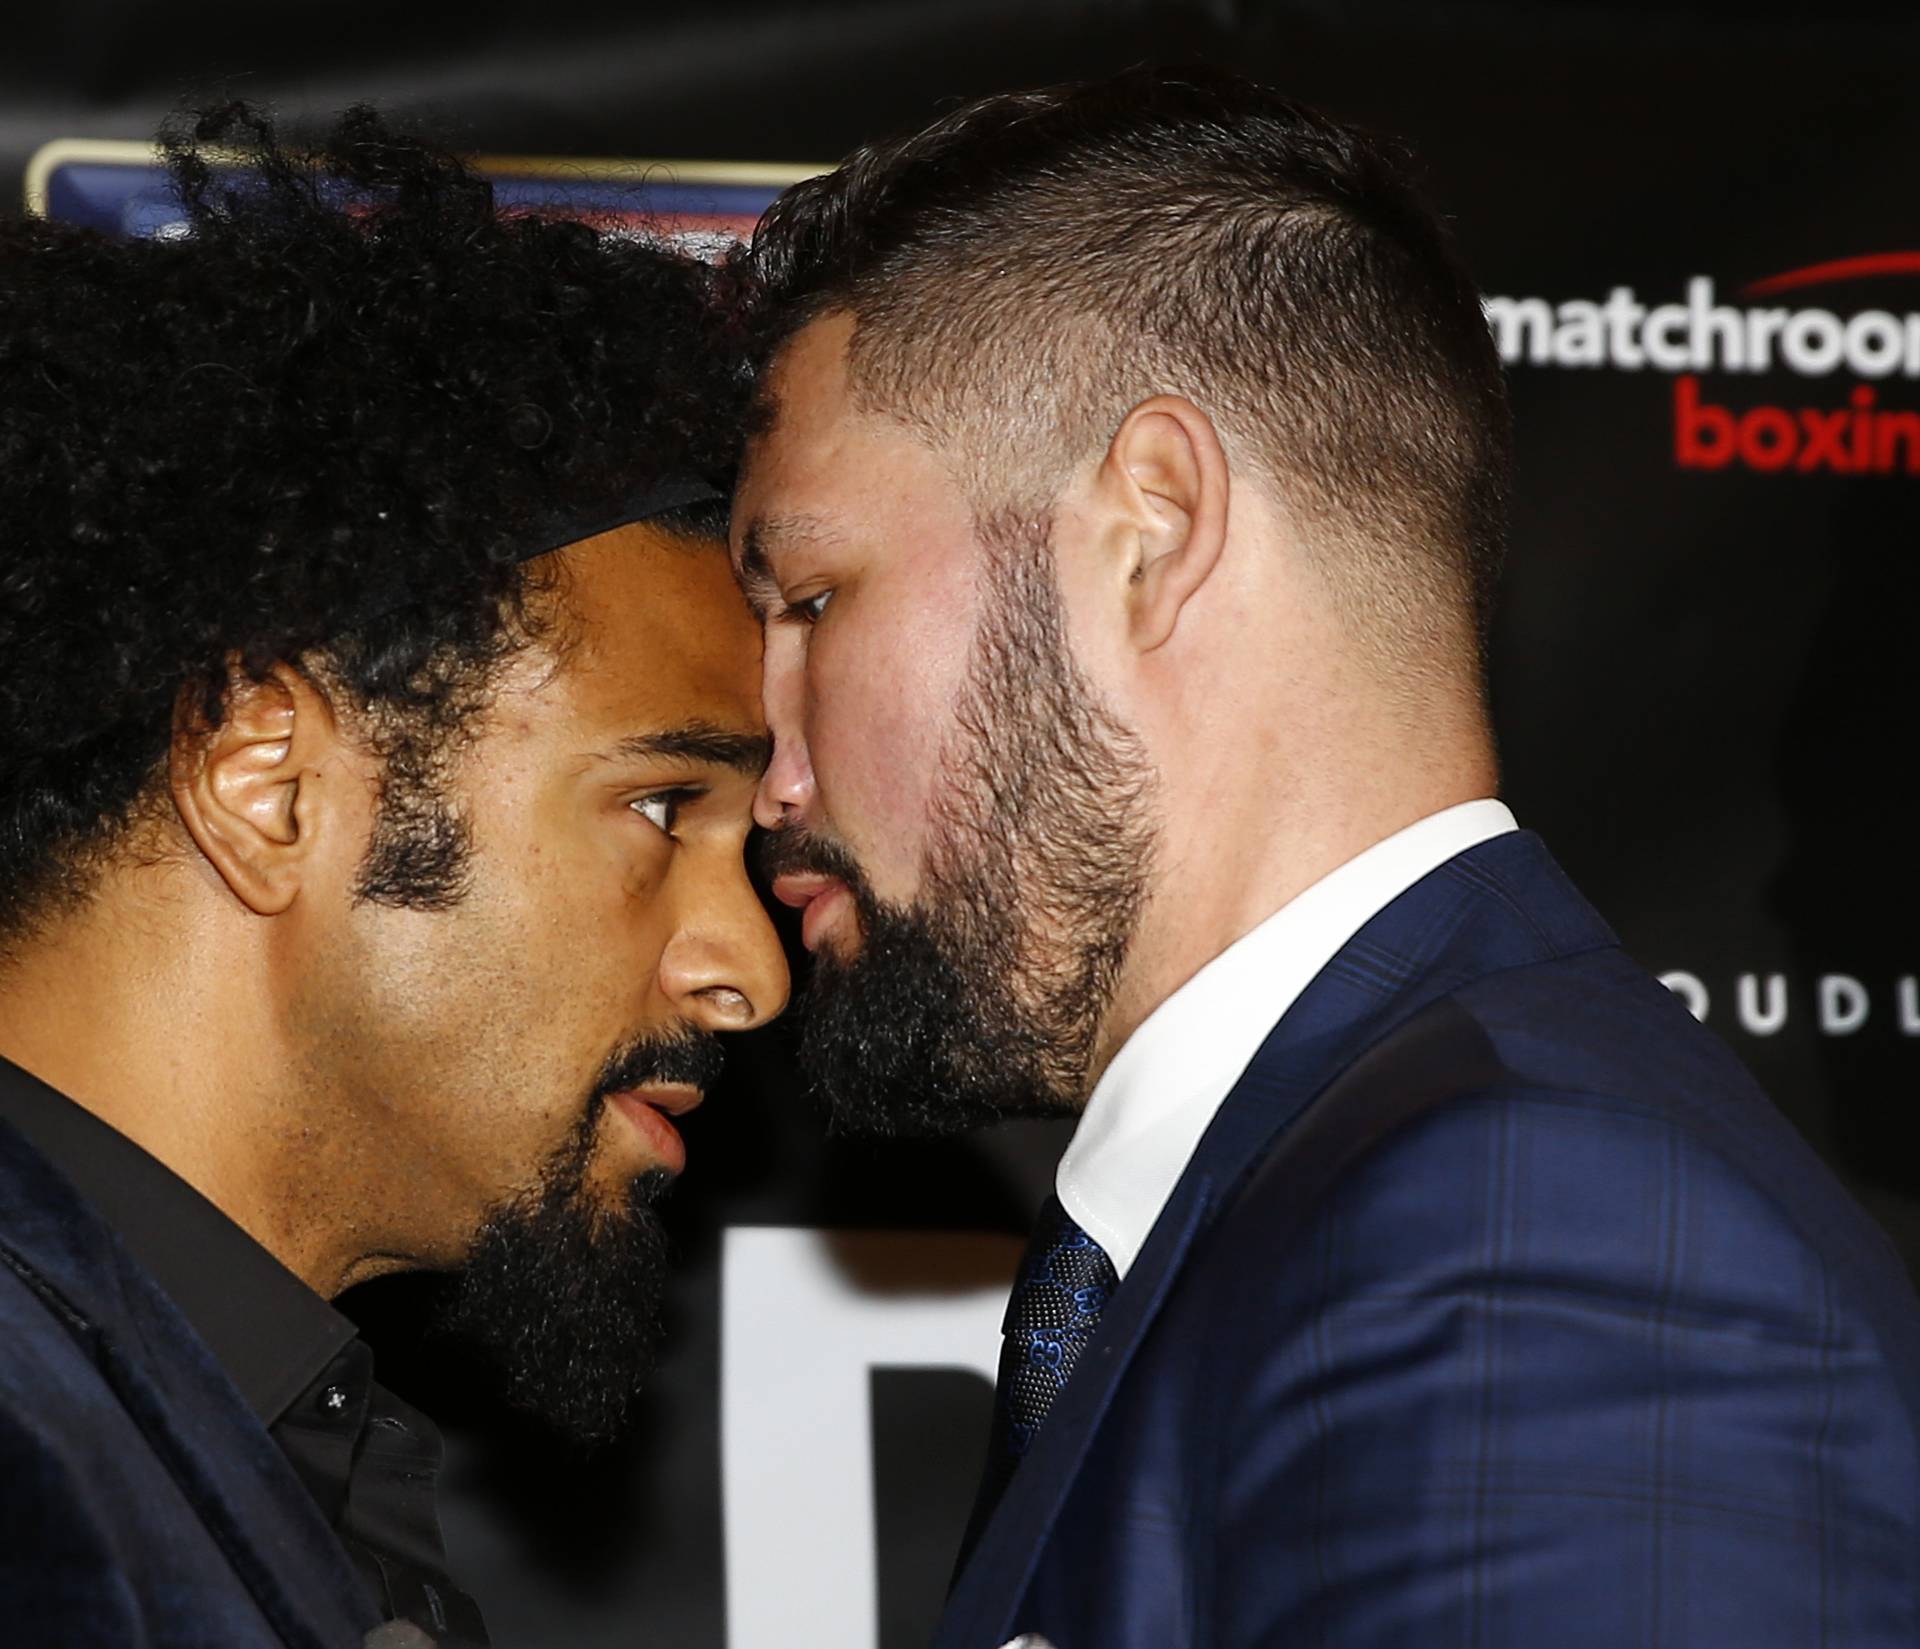 David Haye and Tony Bellew go head to head after the press conference